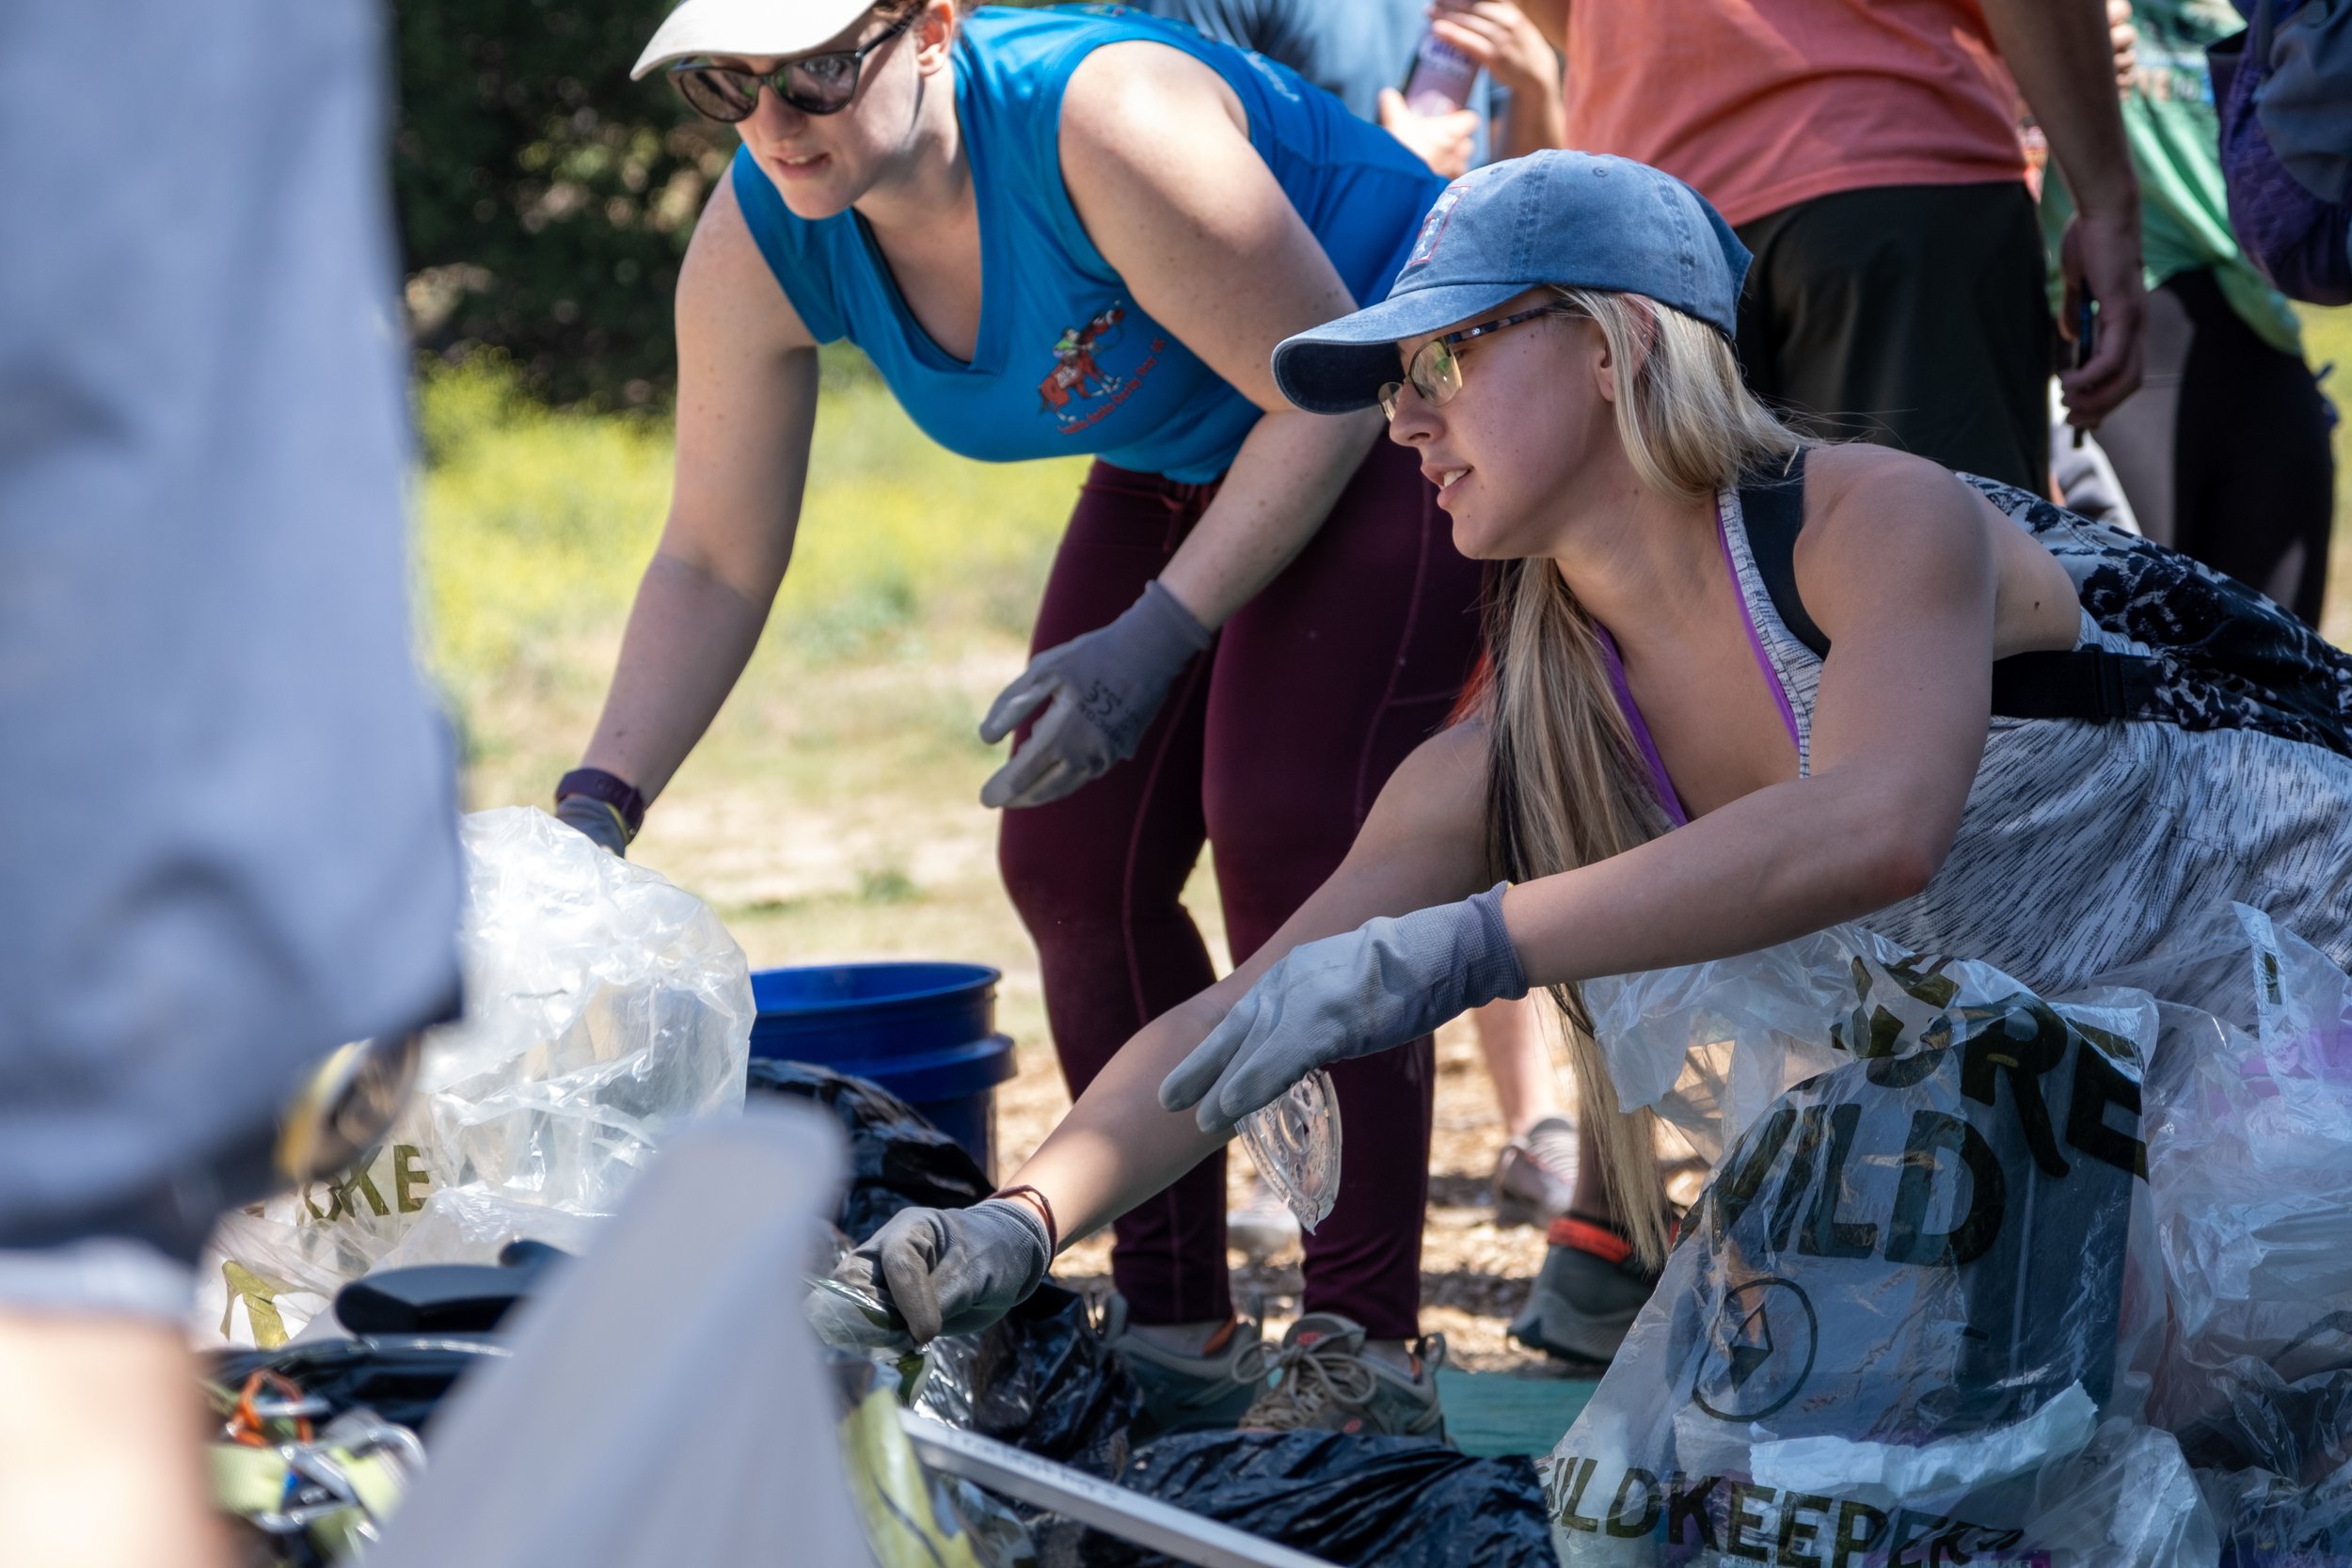  Caitlin (left) and Sammy (right) sort through the trash that has been collected at Stoney Point Park in Chatsworth, Los Angeles, California on Saturday, April 9, 2022. (Anna Sophia Moltke | The Corsair) 